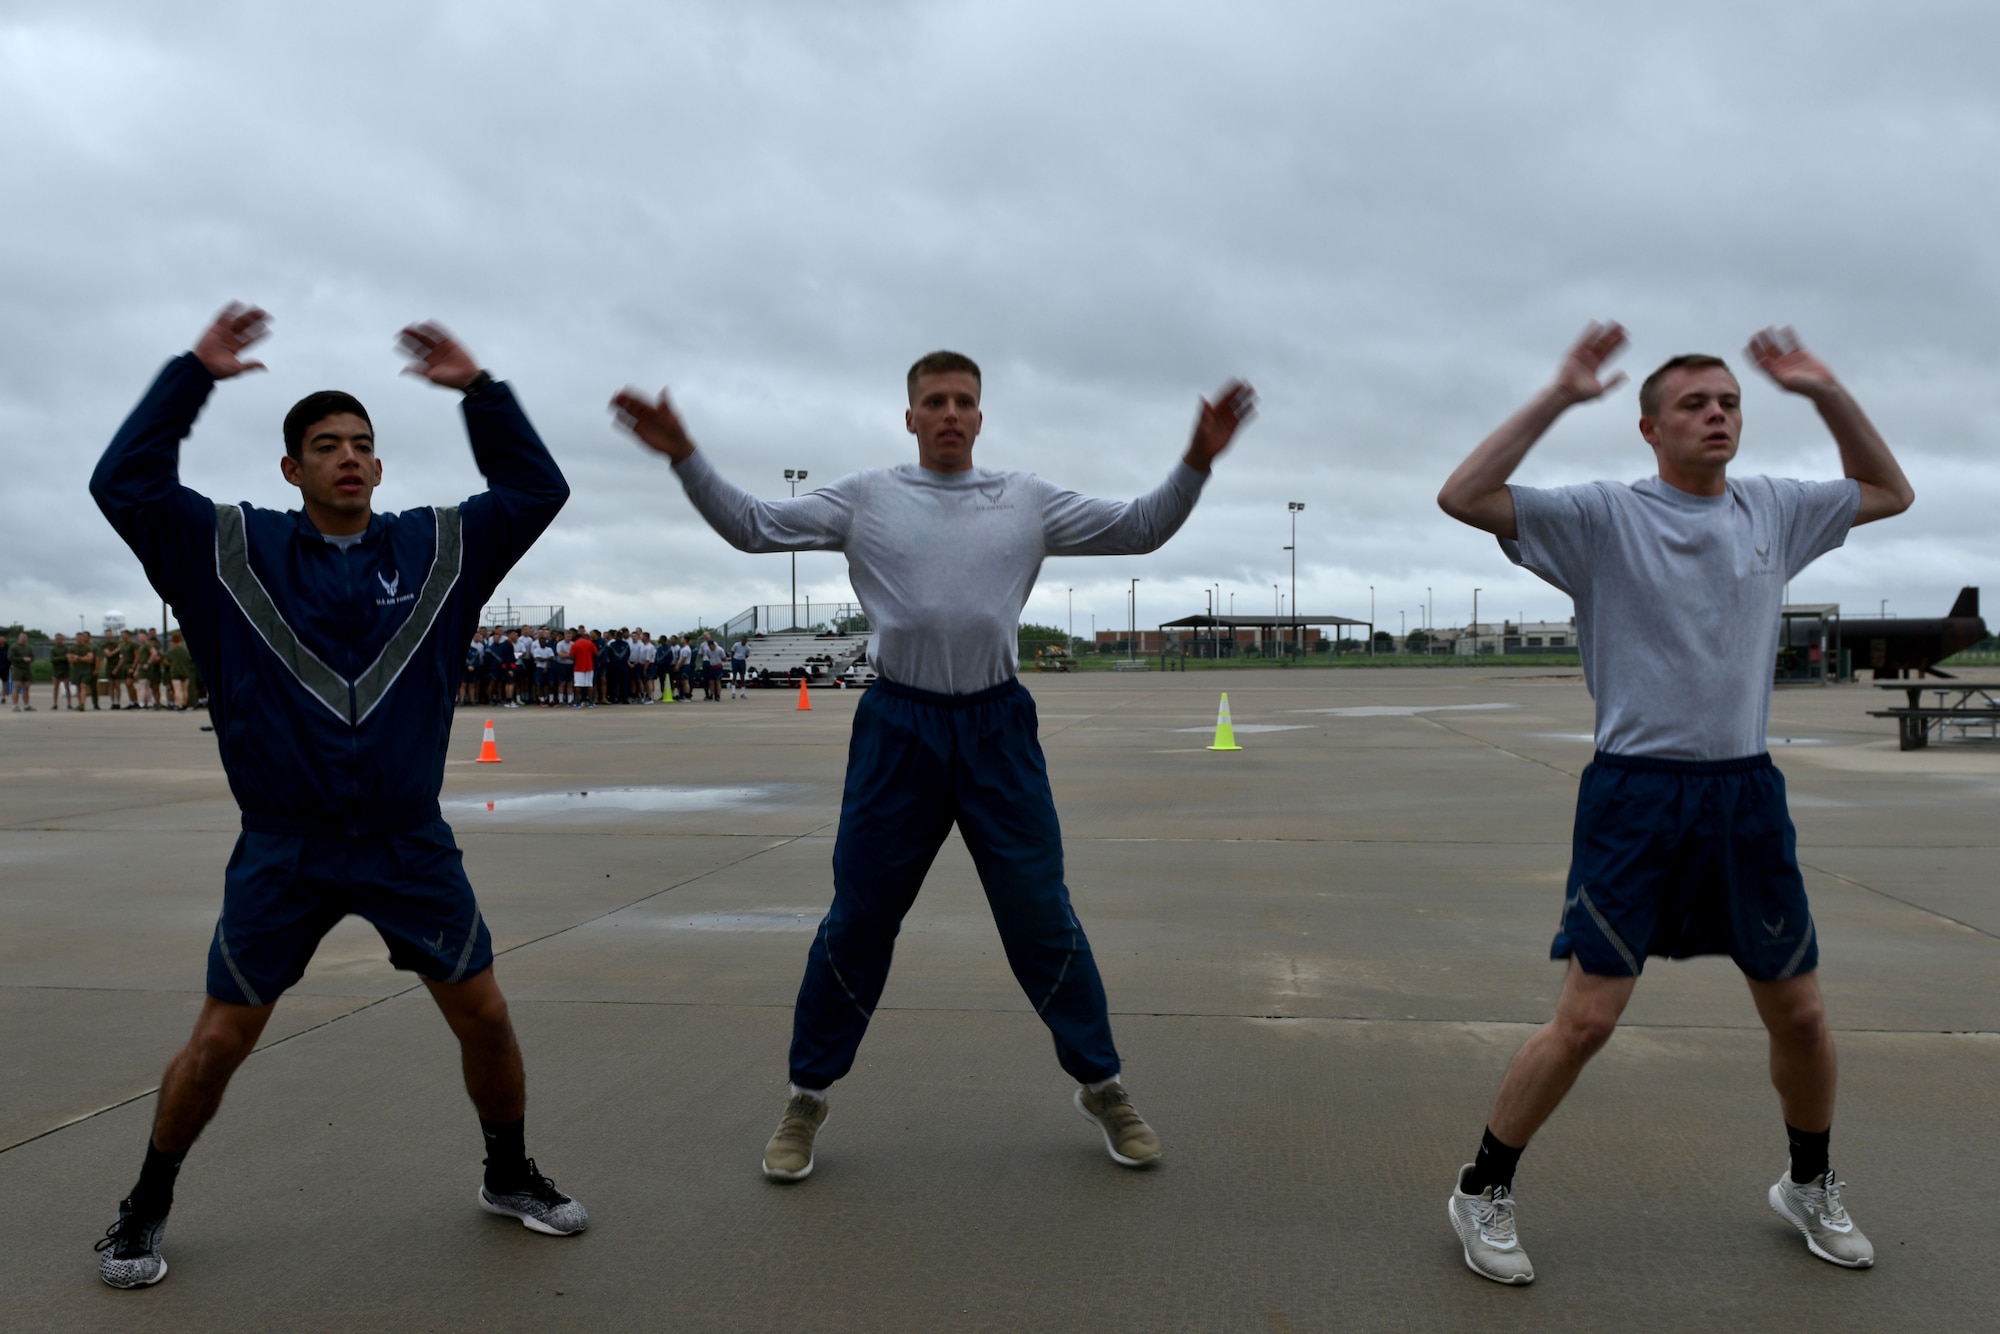 Airman Jake Peterson, Airman 1st Class Garrett Rivett and Airman Haden Stoner, 312th Training Squadron students, perform jumping jacks during the Blood, Sweat and Stairs competition at the Louis F. Garland Department of Defense Fire Academy on Goodfellow Air Force Base, Texas, Sept. 22, 2018. The 312th TRS hosted the event, but many members from the Army, Marines and the Air Force participated. (U.S. Air Force photo by Senior Airman Randall Moose/Released)